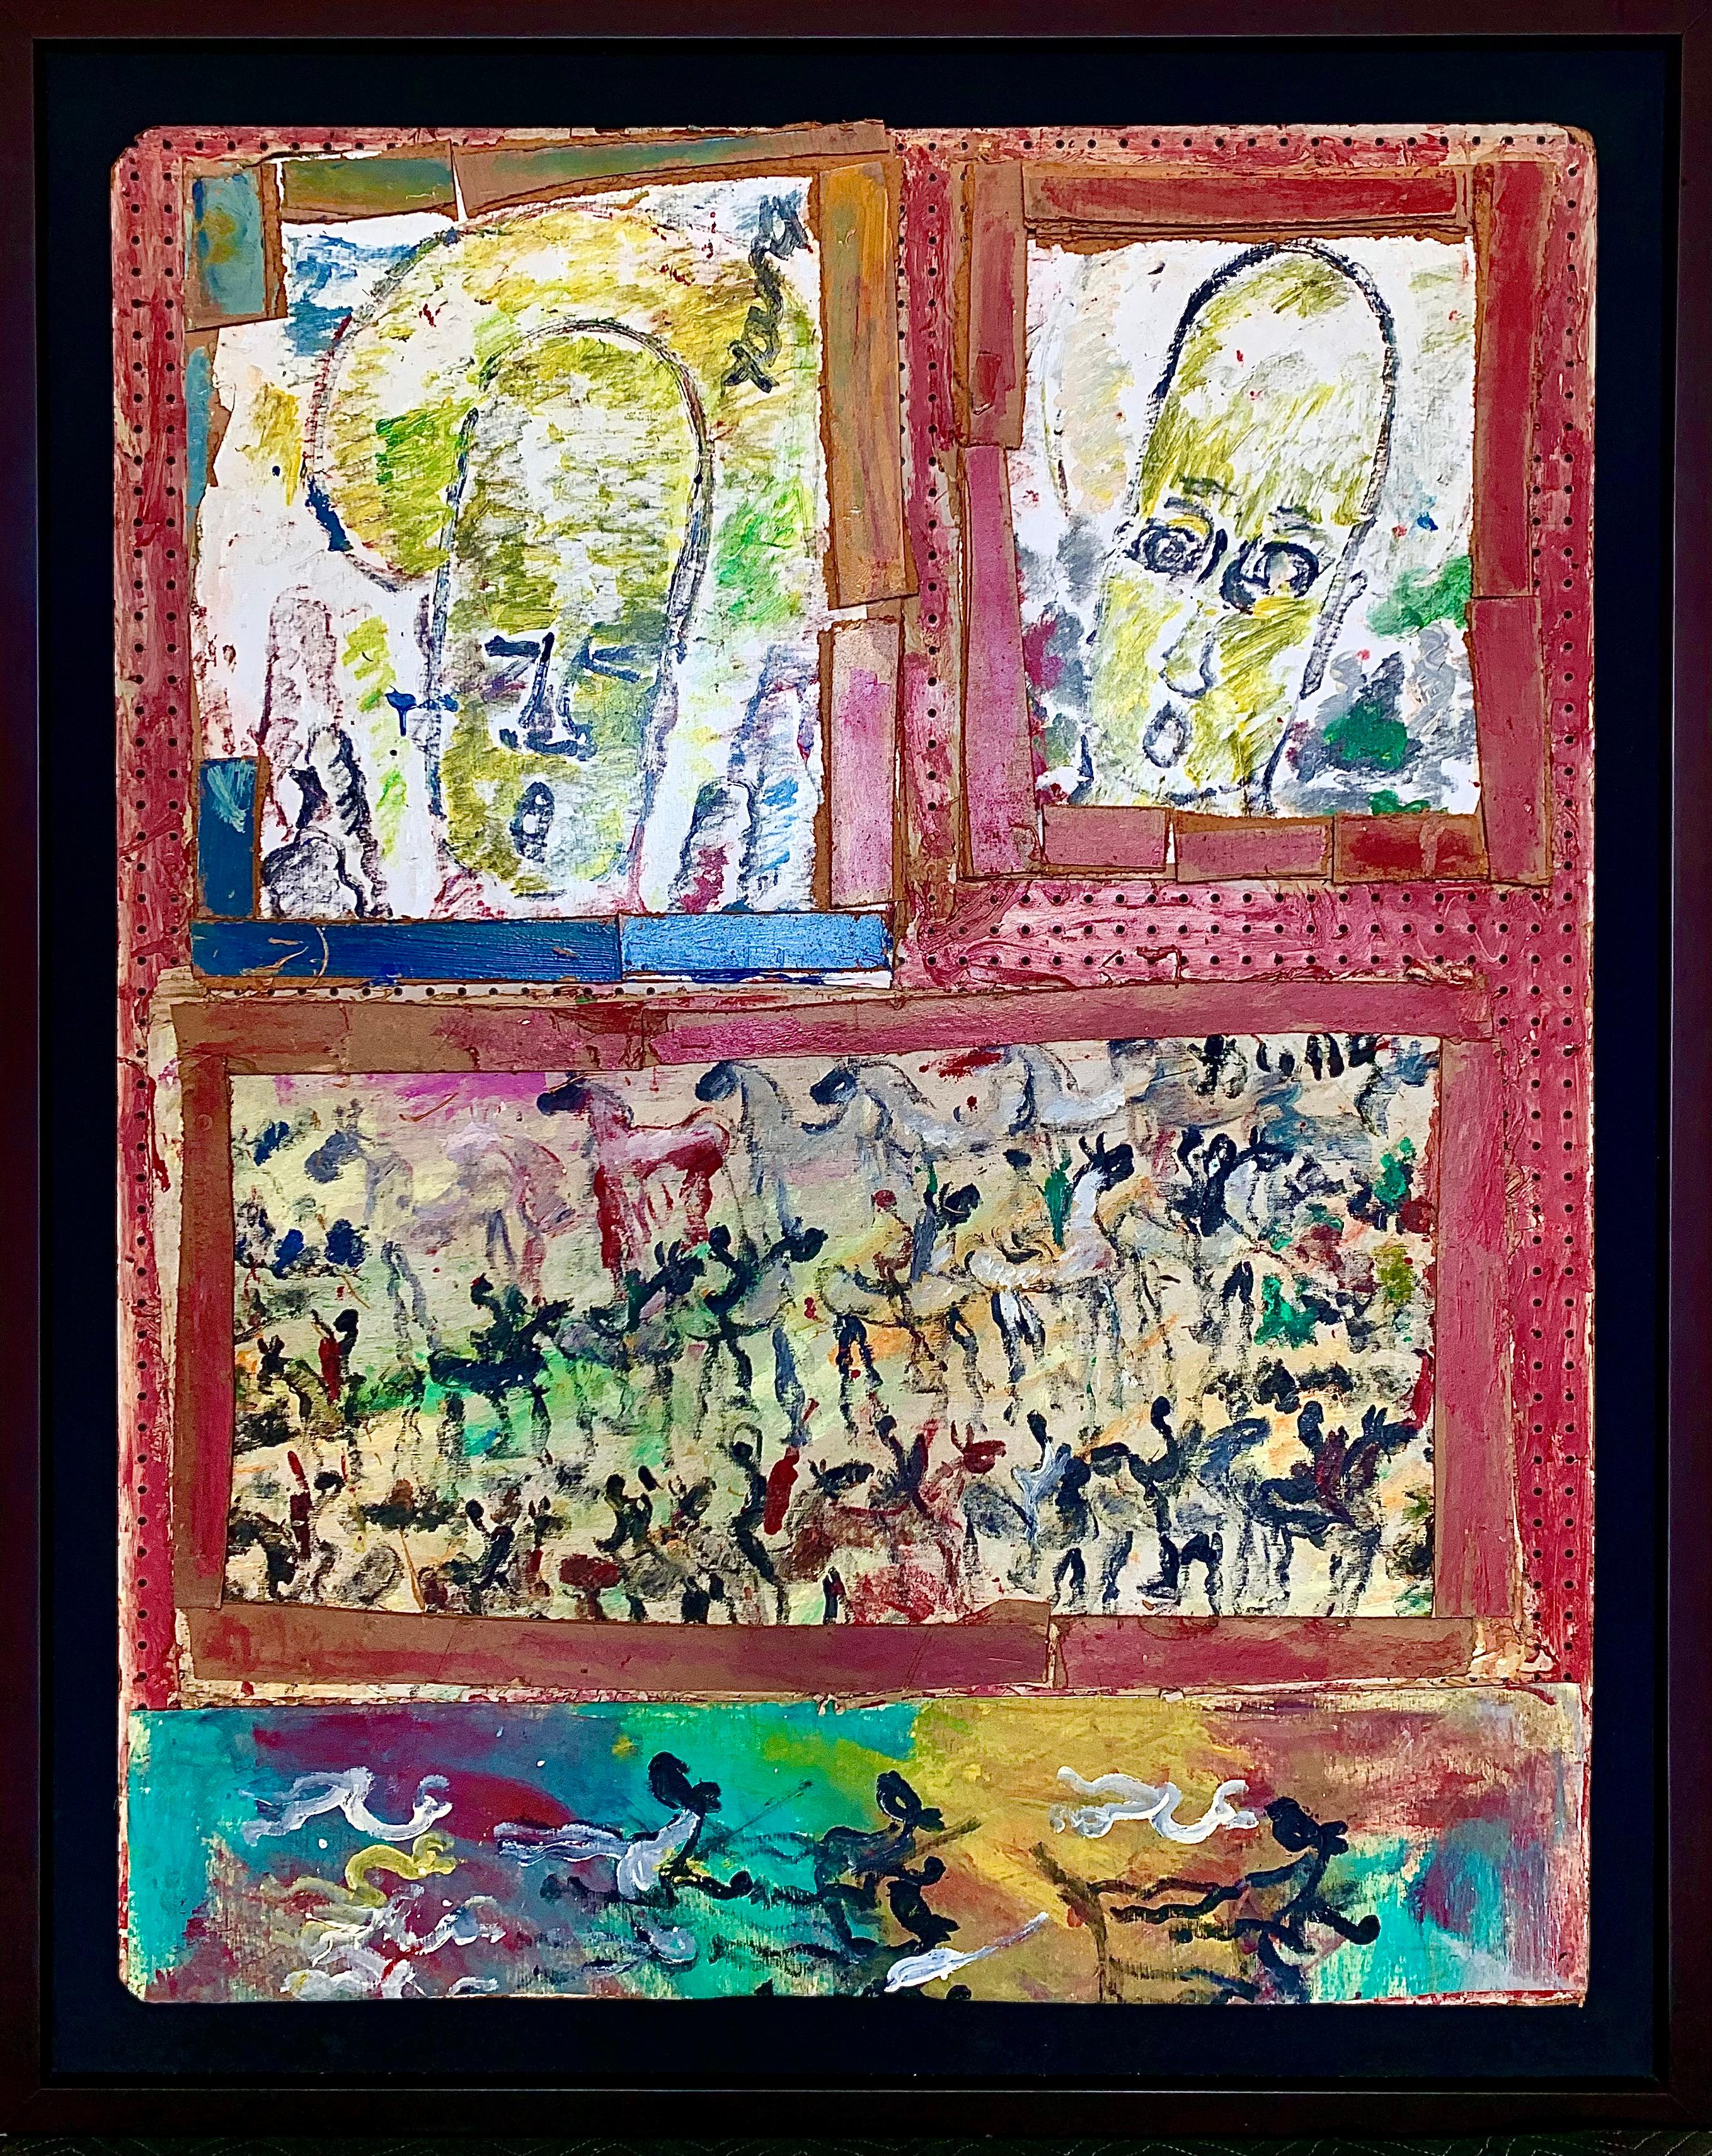  Collage 1990 - Painting by Purvis Young